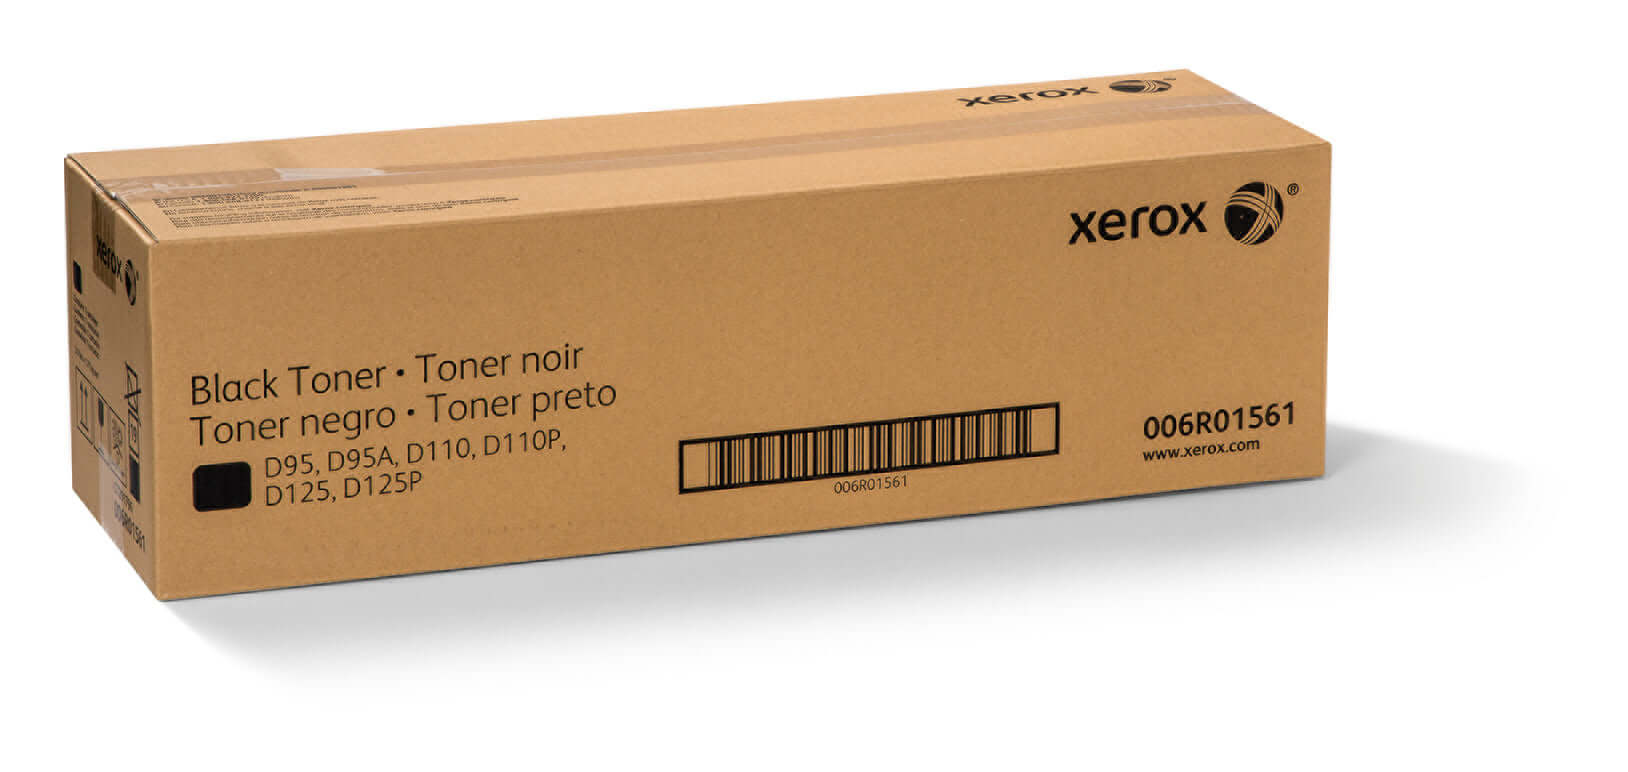 Xerox Black Toner Cartridge (65,000 Pages) 006R01561 for D95/D110/D125